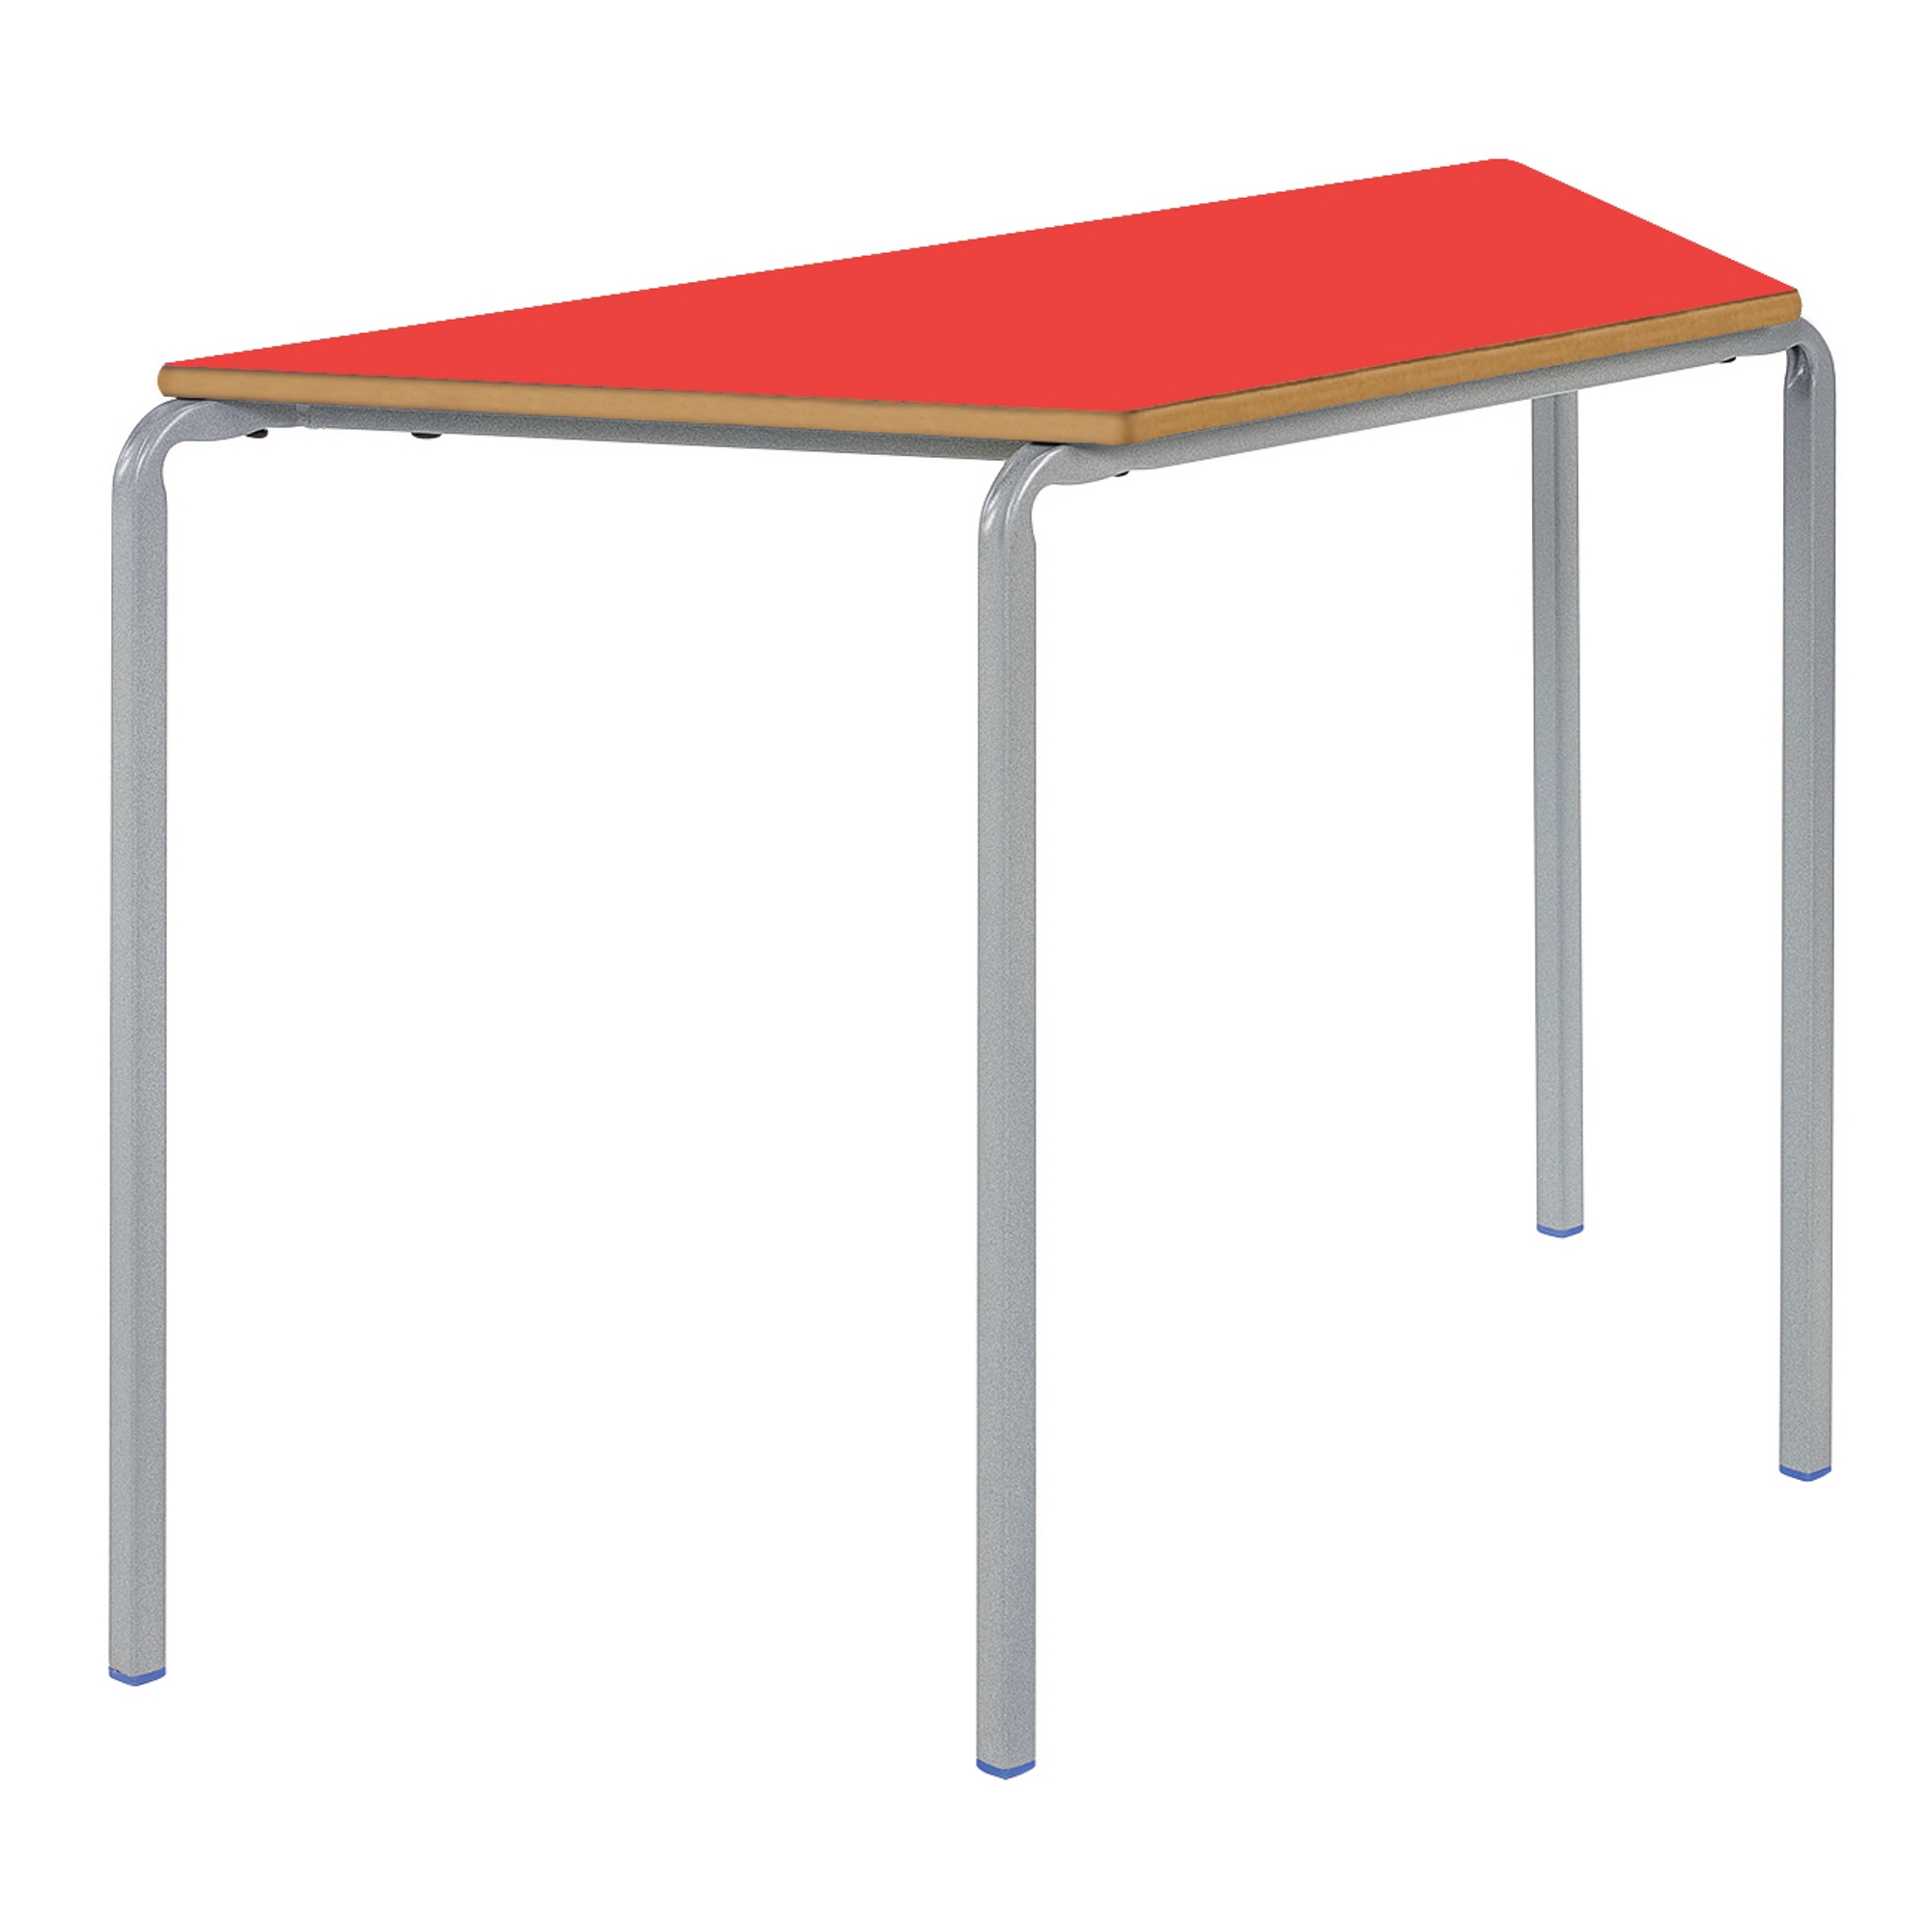 Classmates Trapezoidal Crushed Bent Classroom Table - 1100 x 550 x 640mm - Red